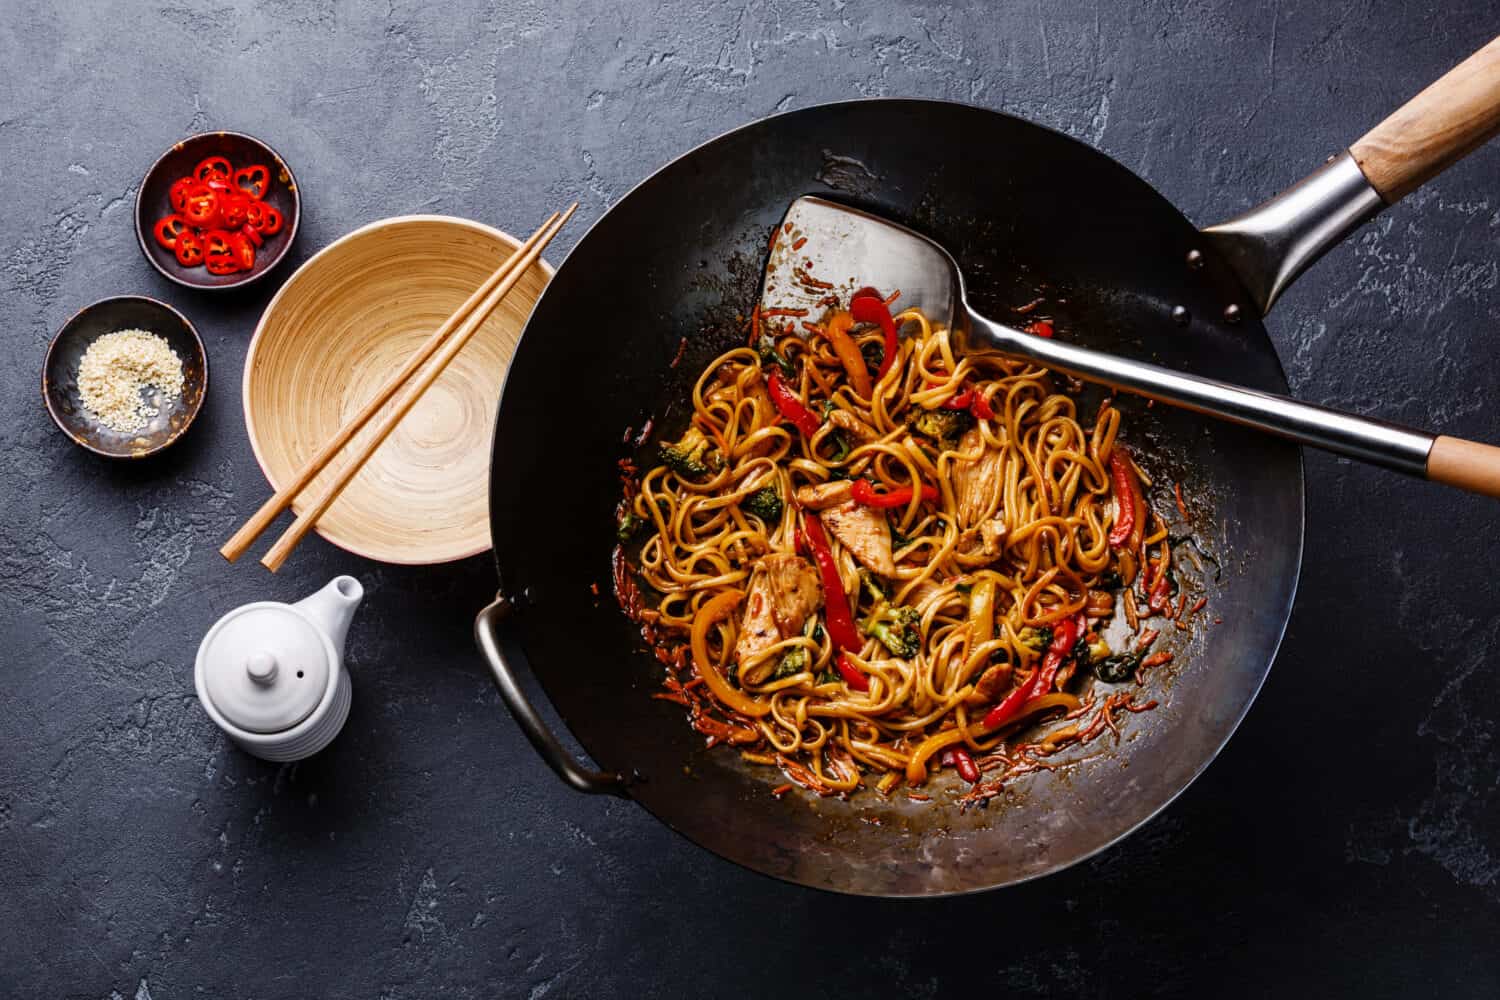 Pan fried noodles with chicken and vegetables in wok pan on dark stone background